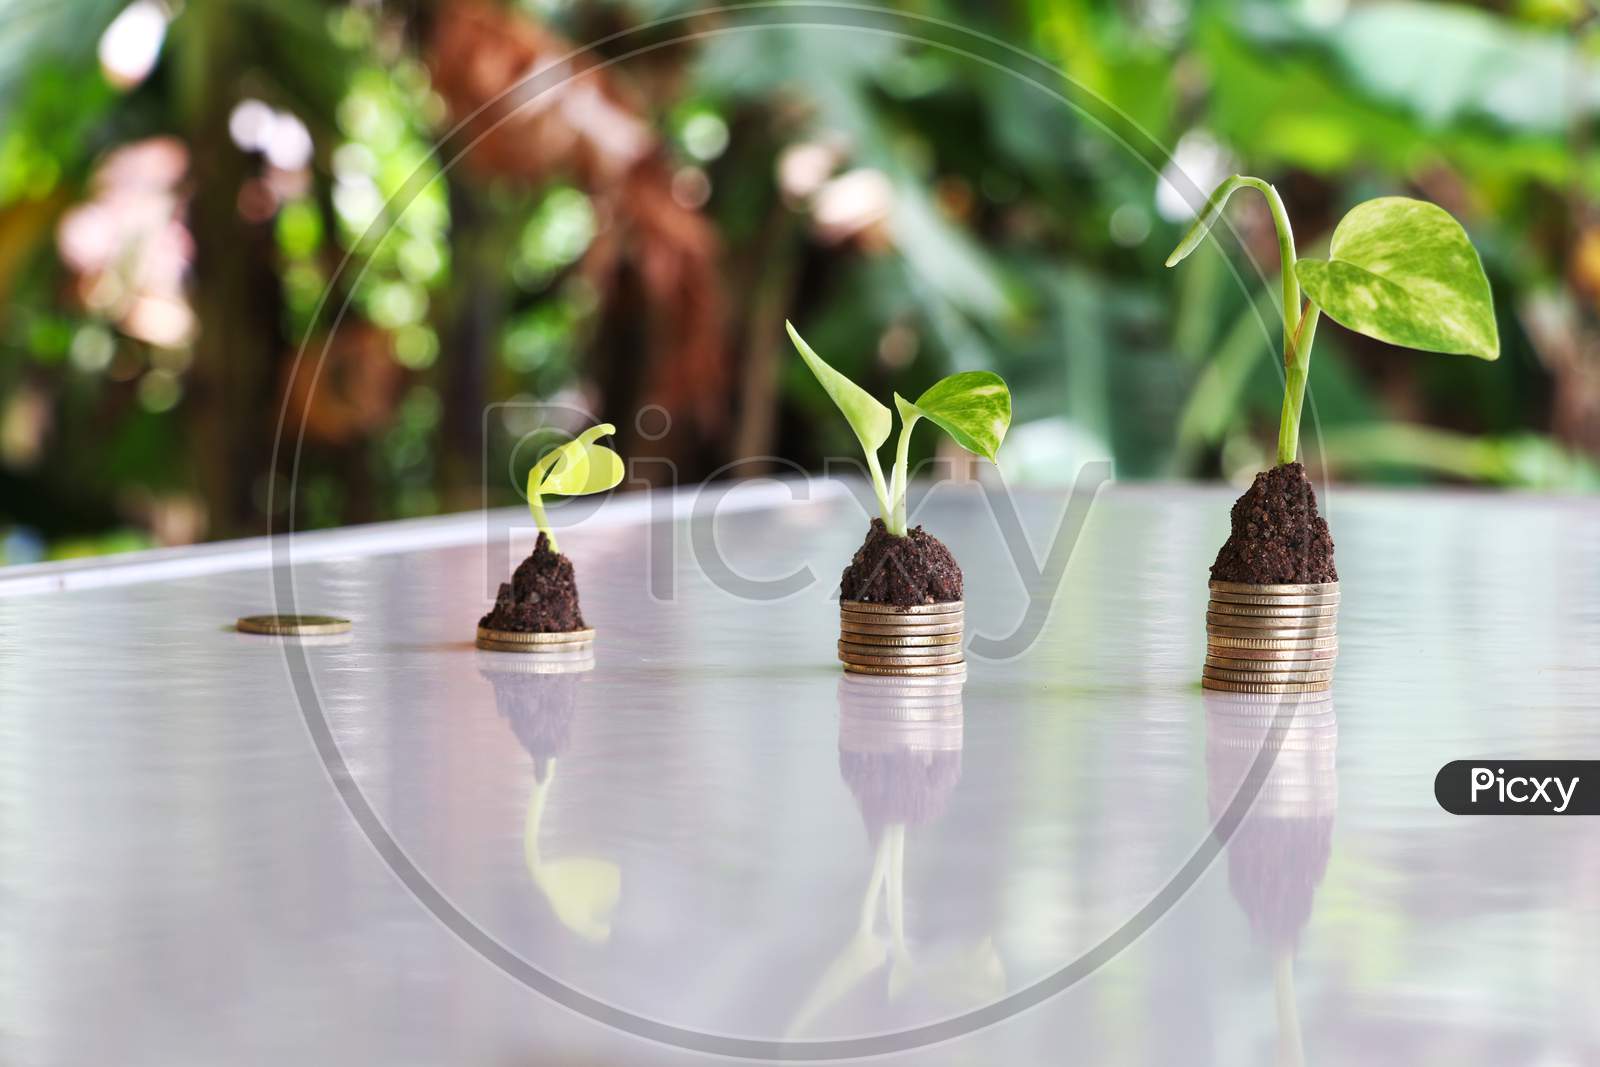 Plant Grow On Money Stacks In A Bokeh Environment . Money Saving And Sustainable Business Investment Idea